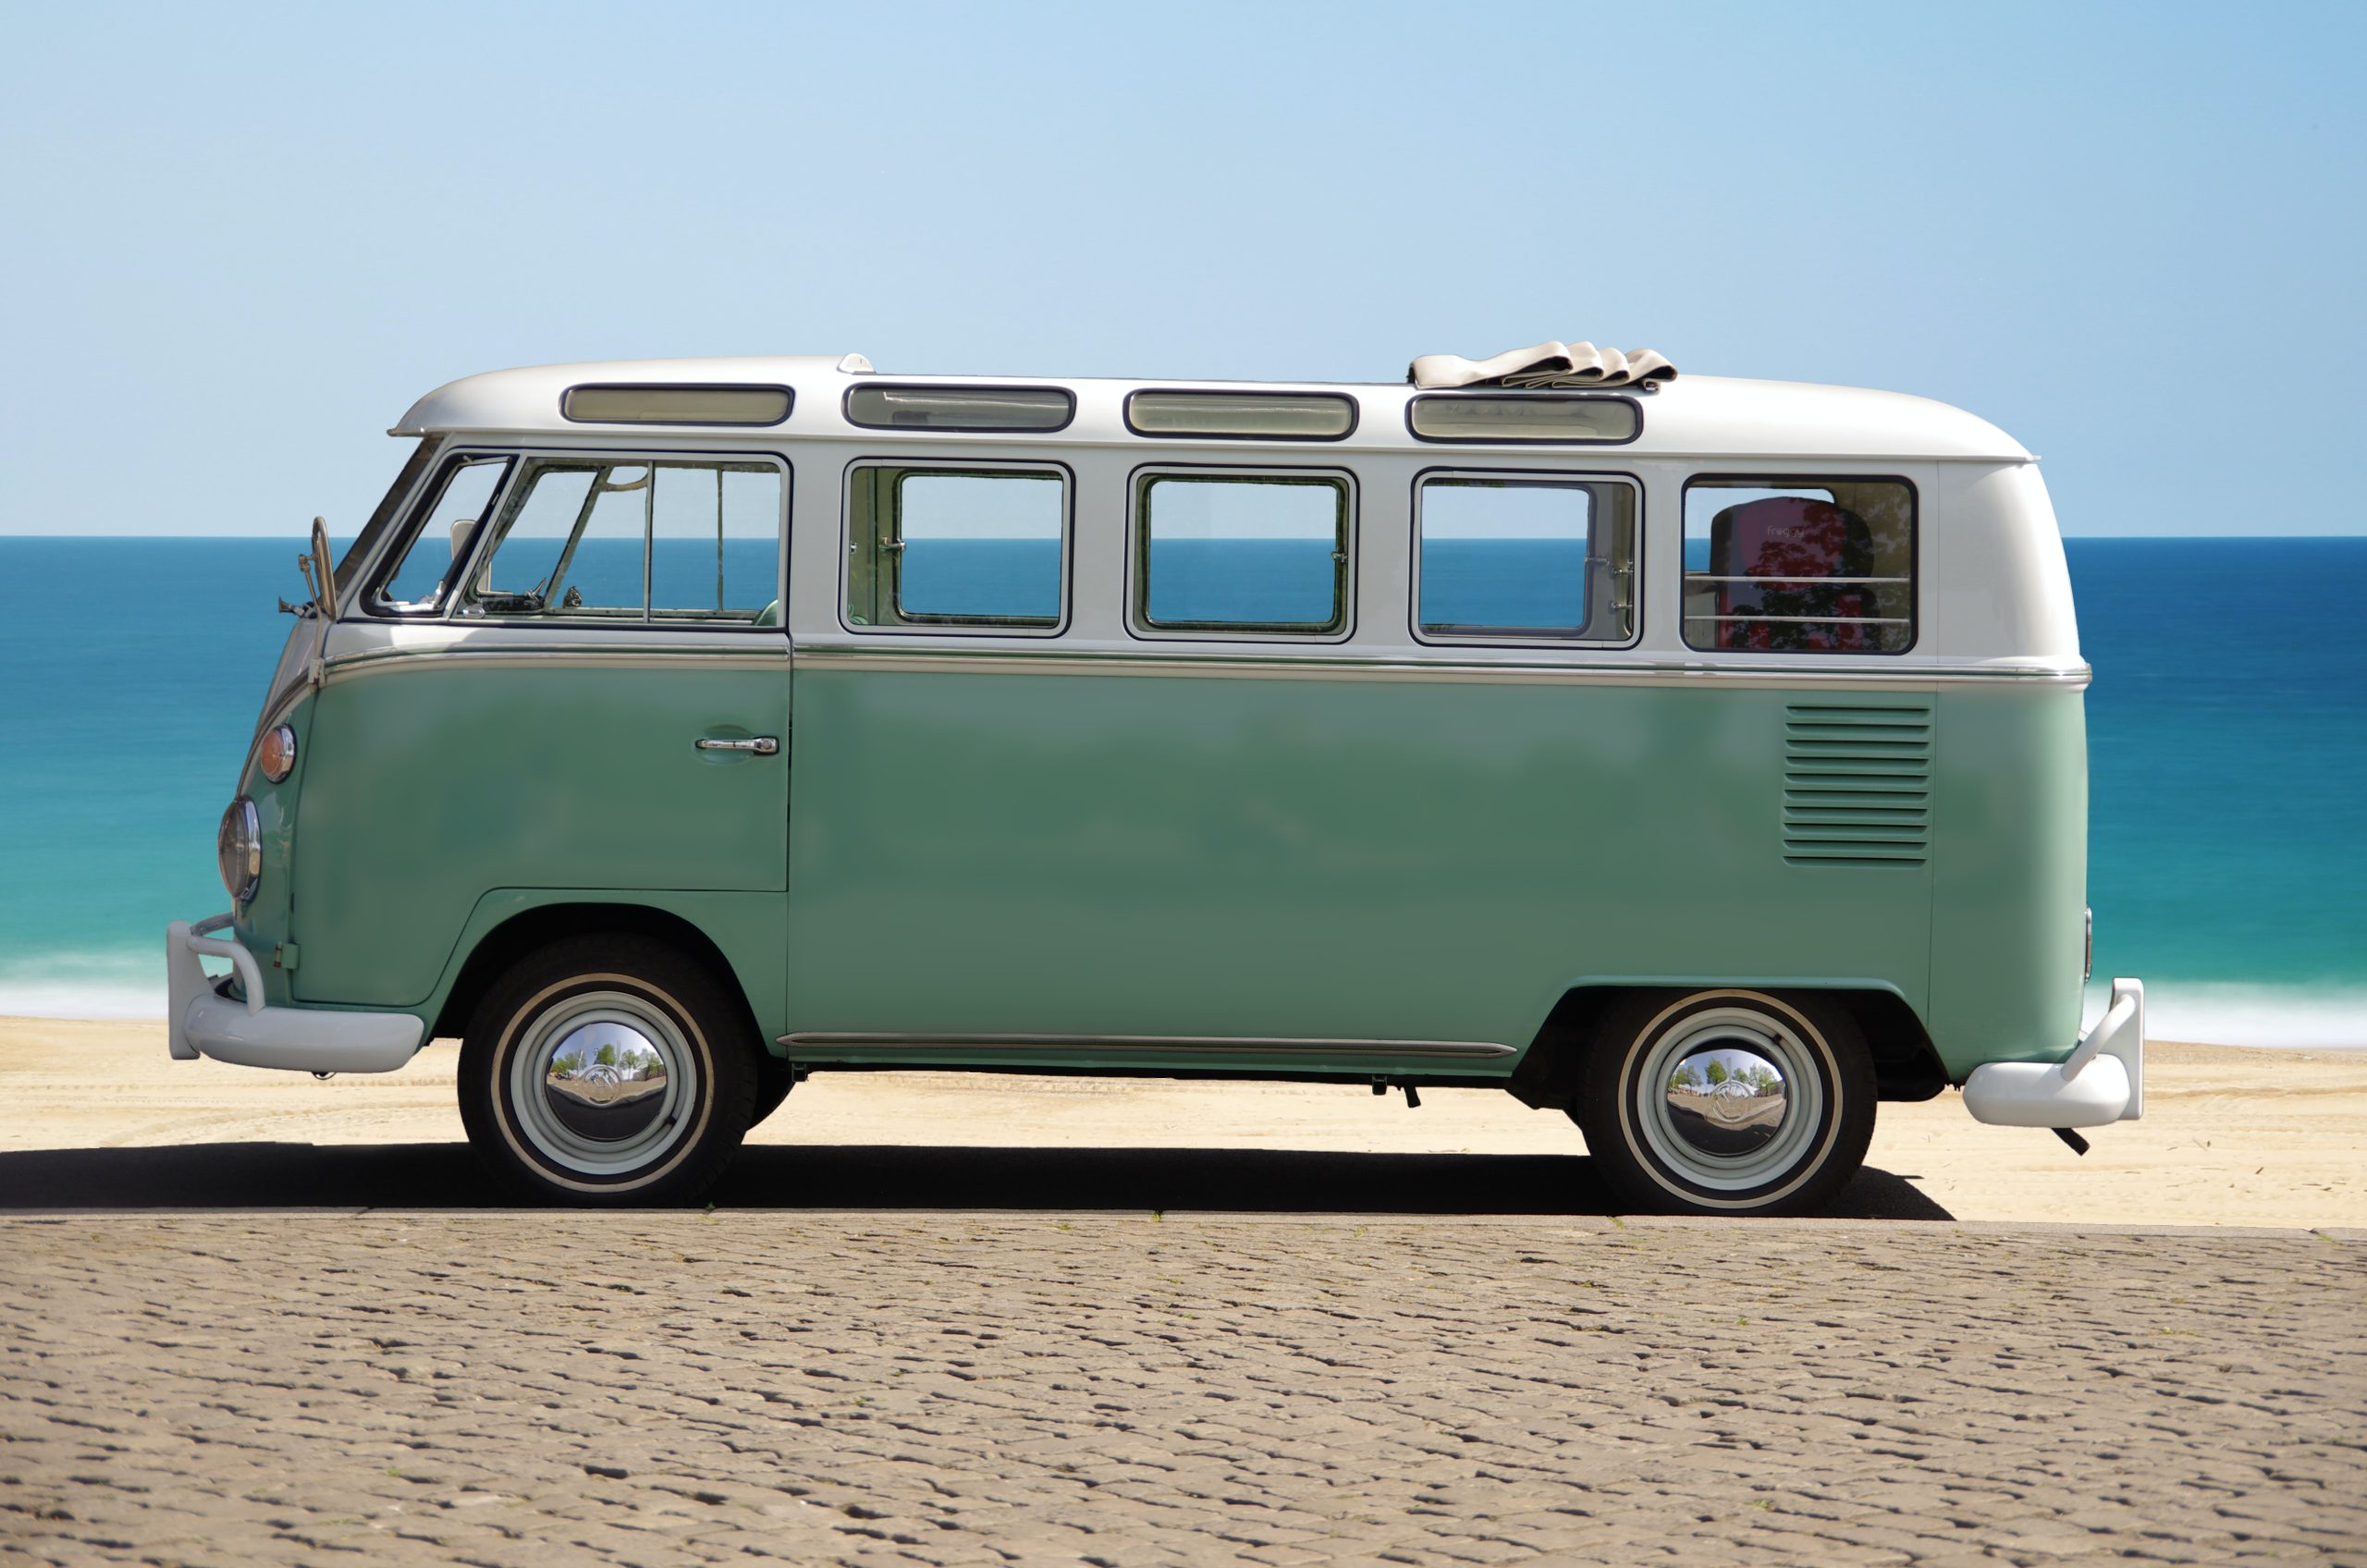 Compare VW Campervan Insurance Quotes Today